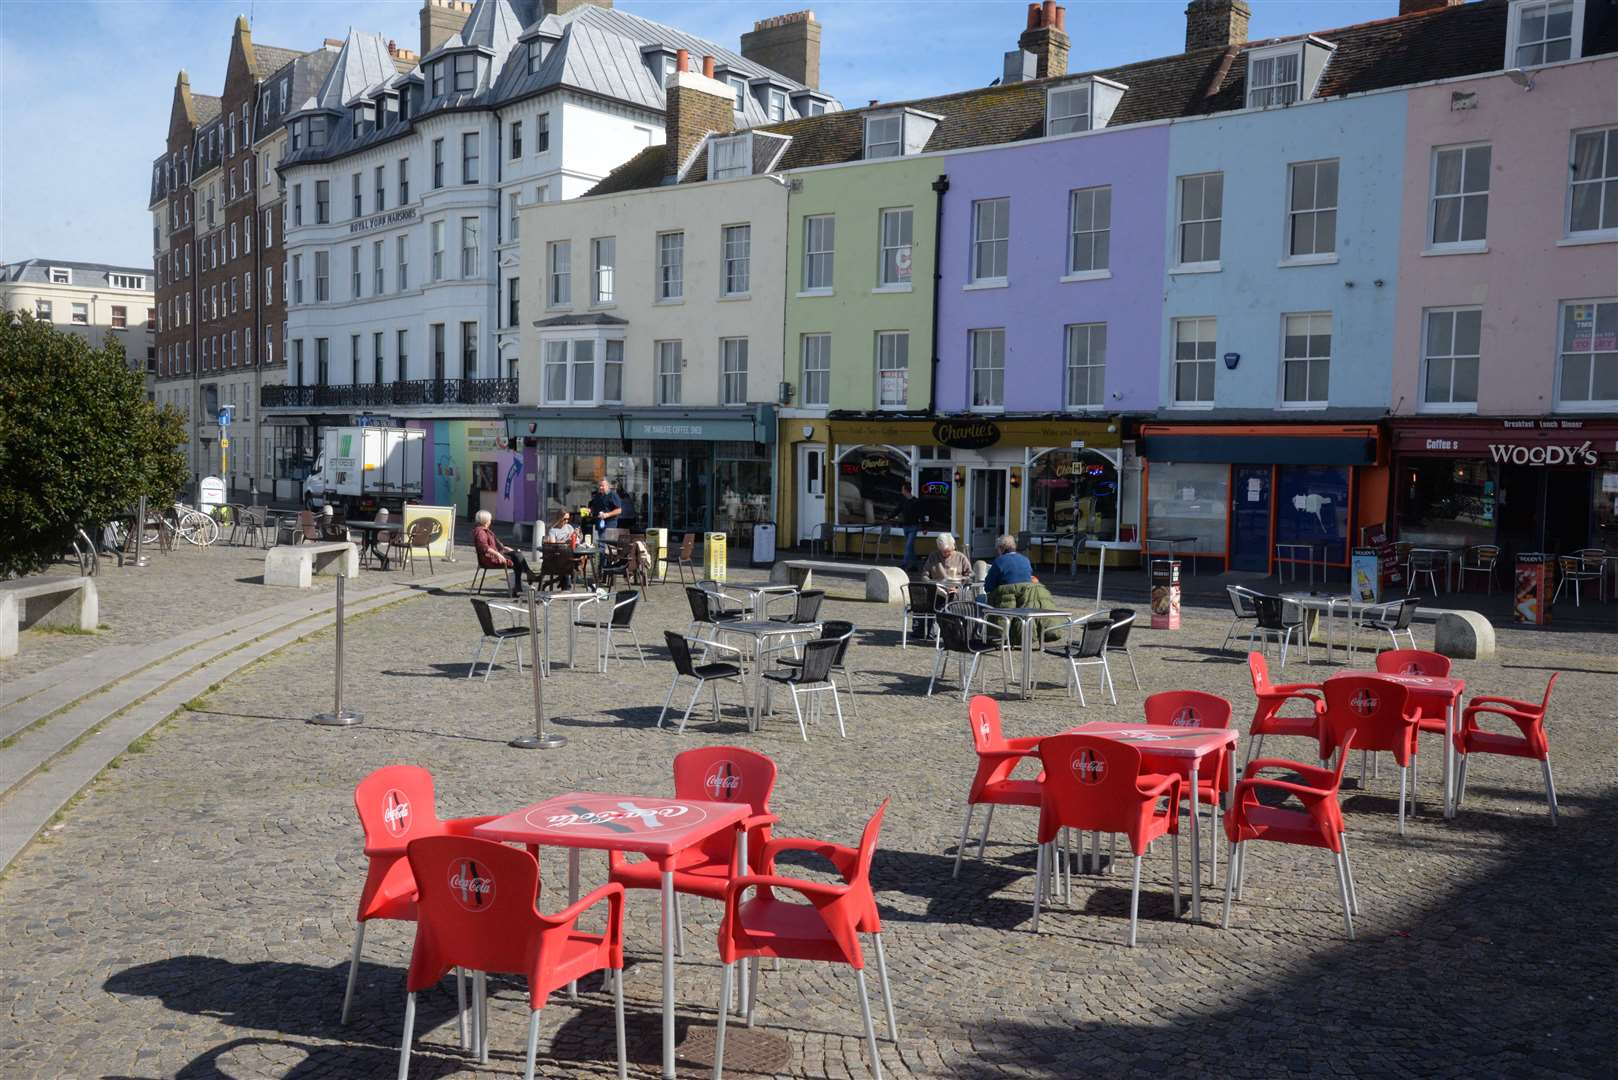 Empty tables around The Parade in Margate despite the sunny weather.